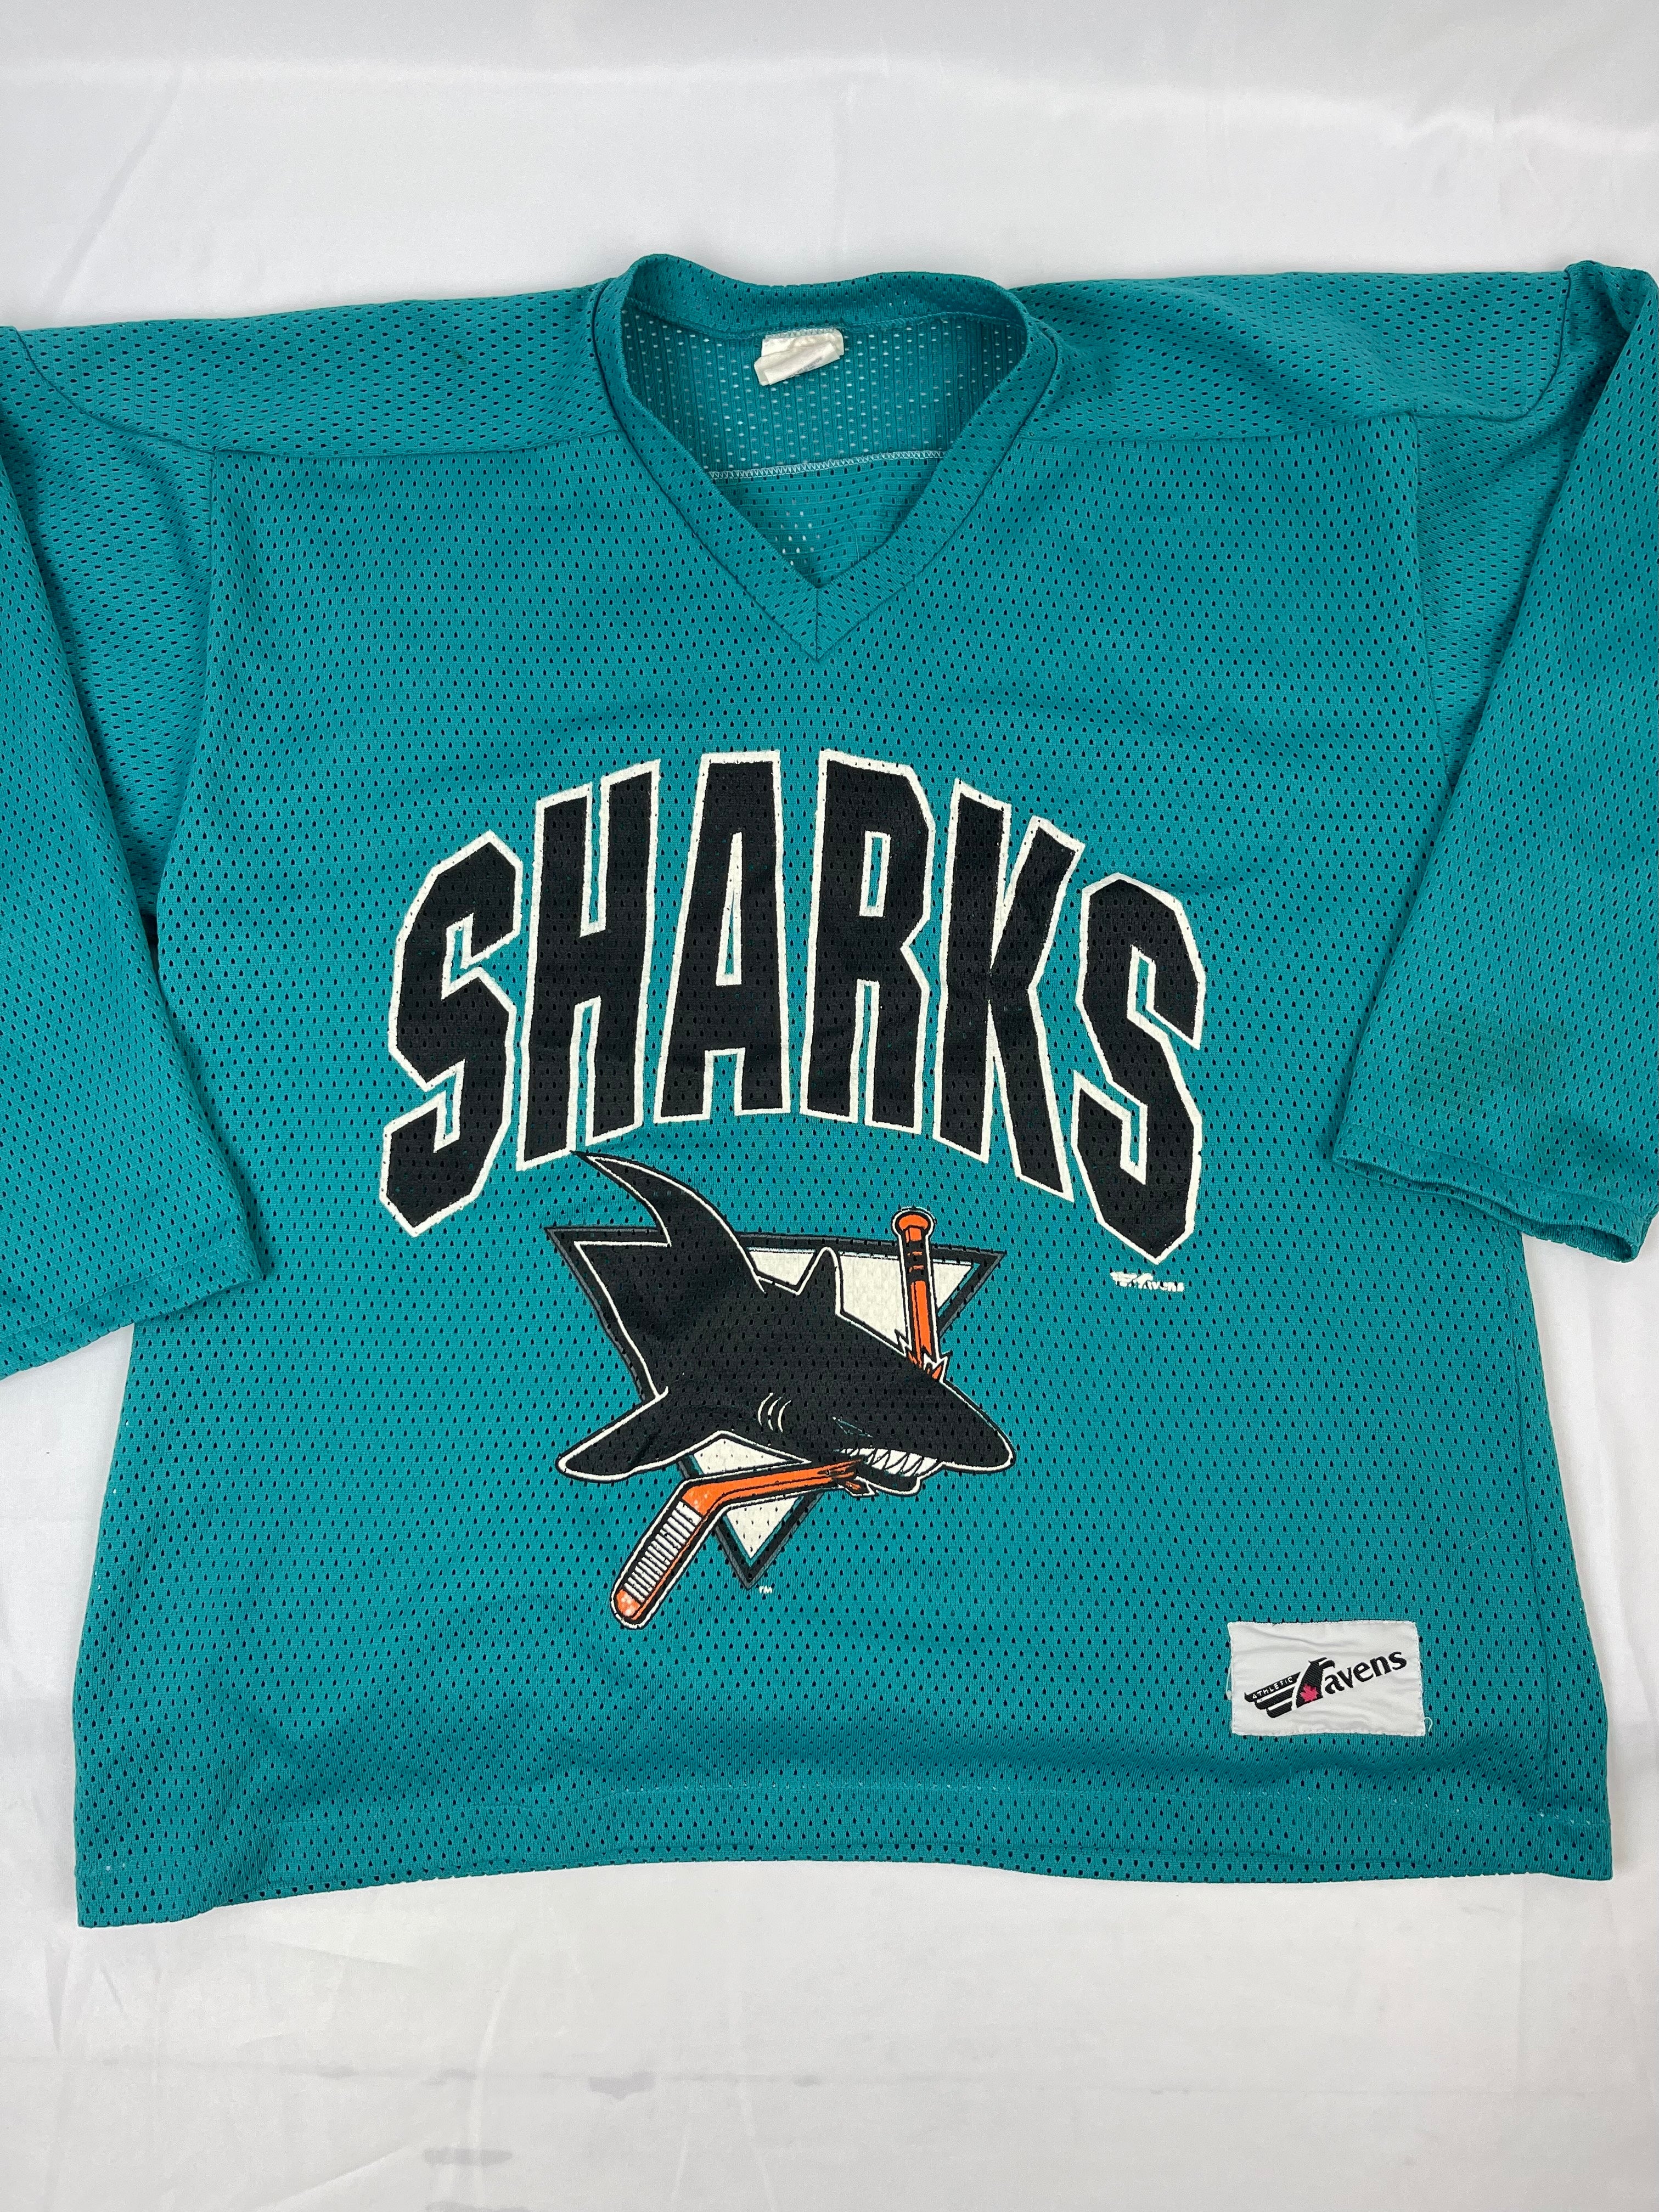 San Jose Sharks Jerseys  New, Preowned, and Vintage